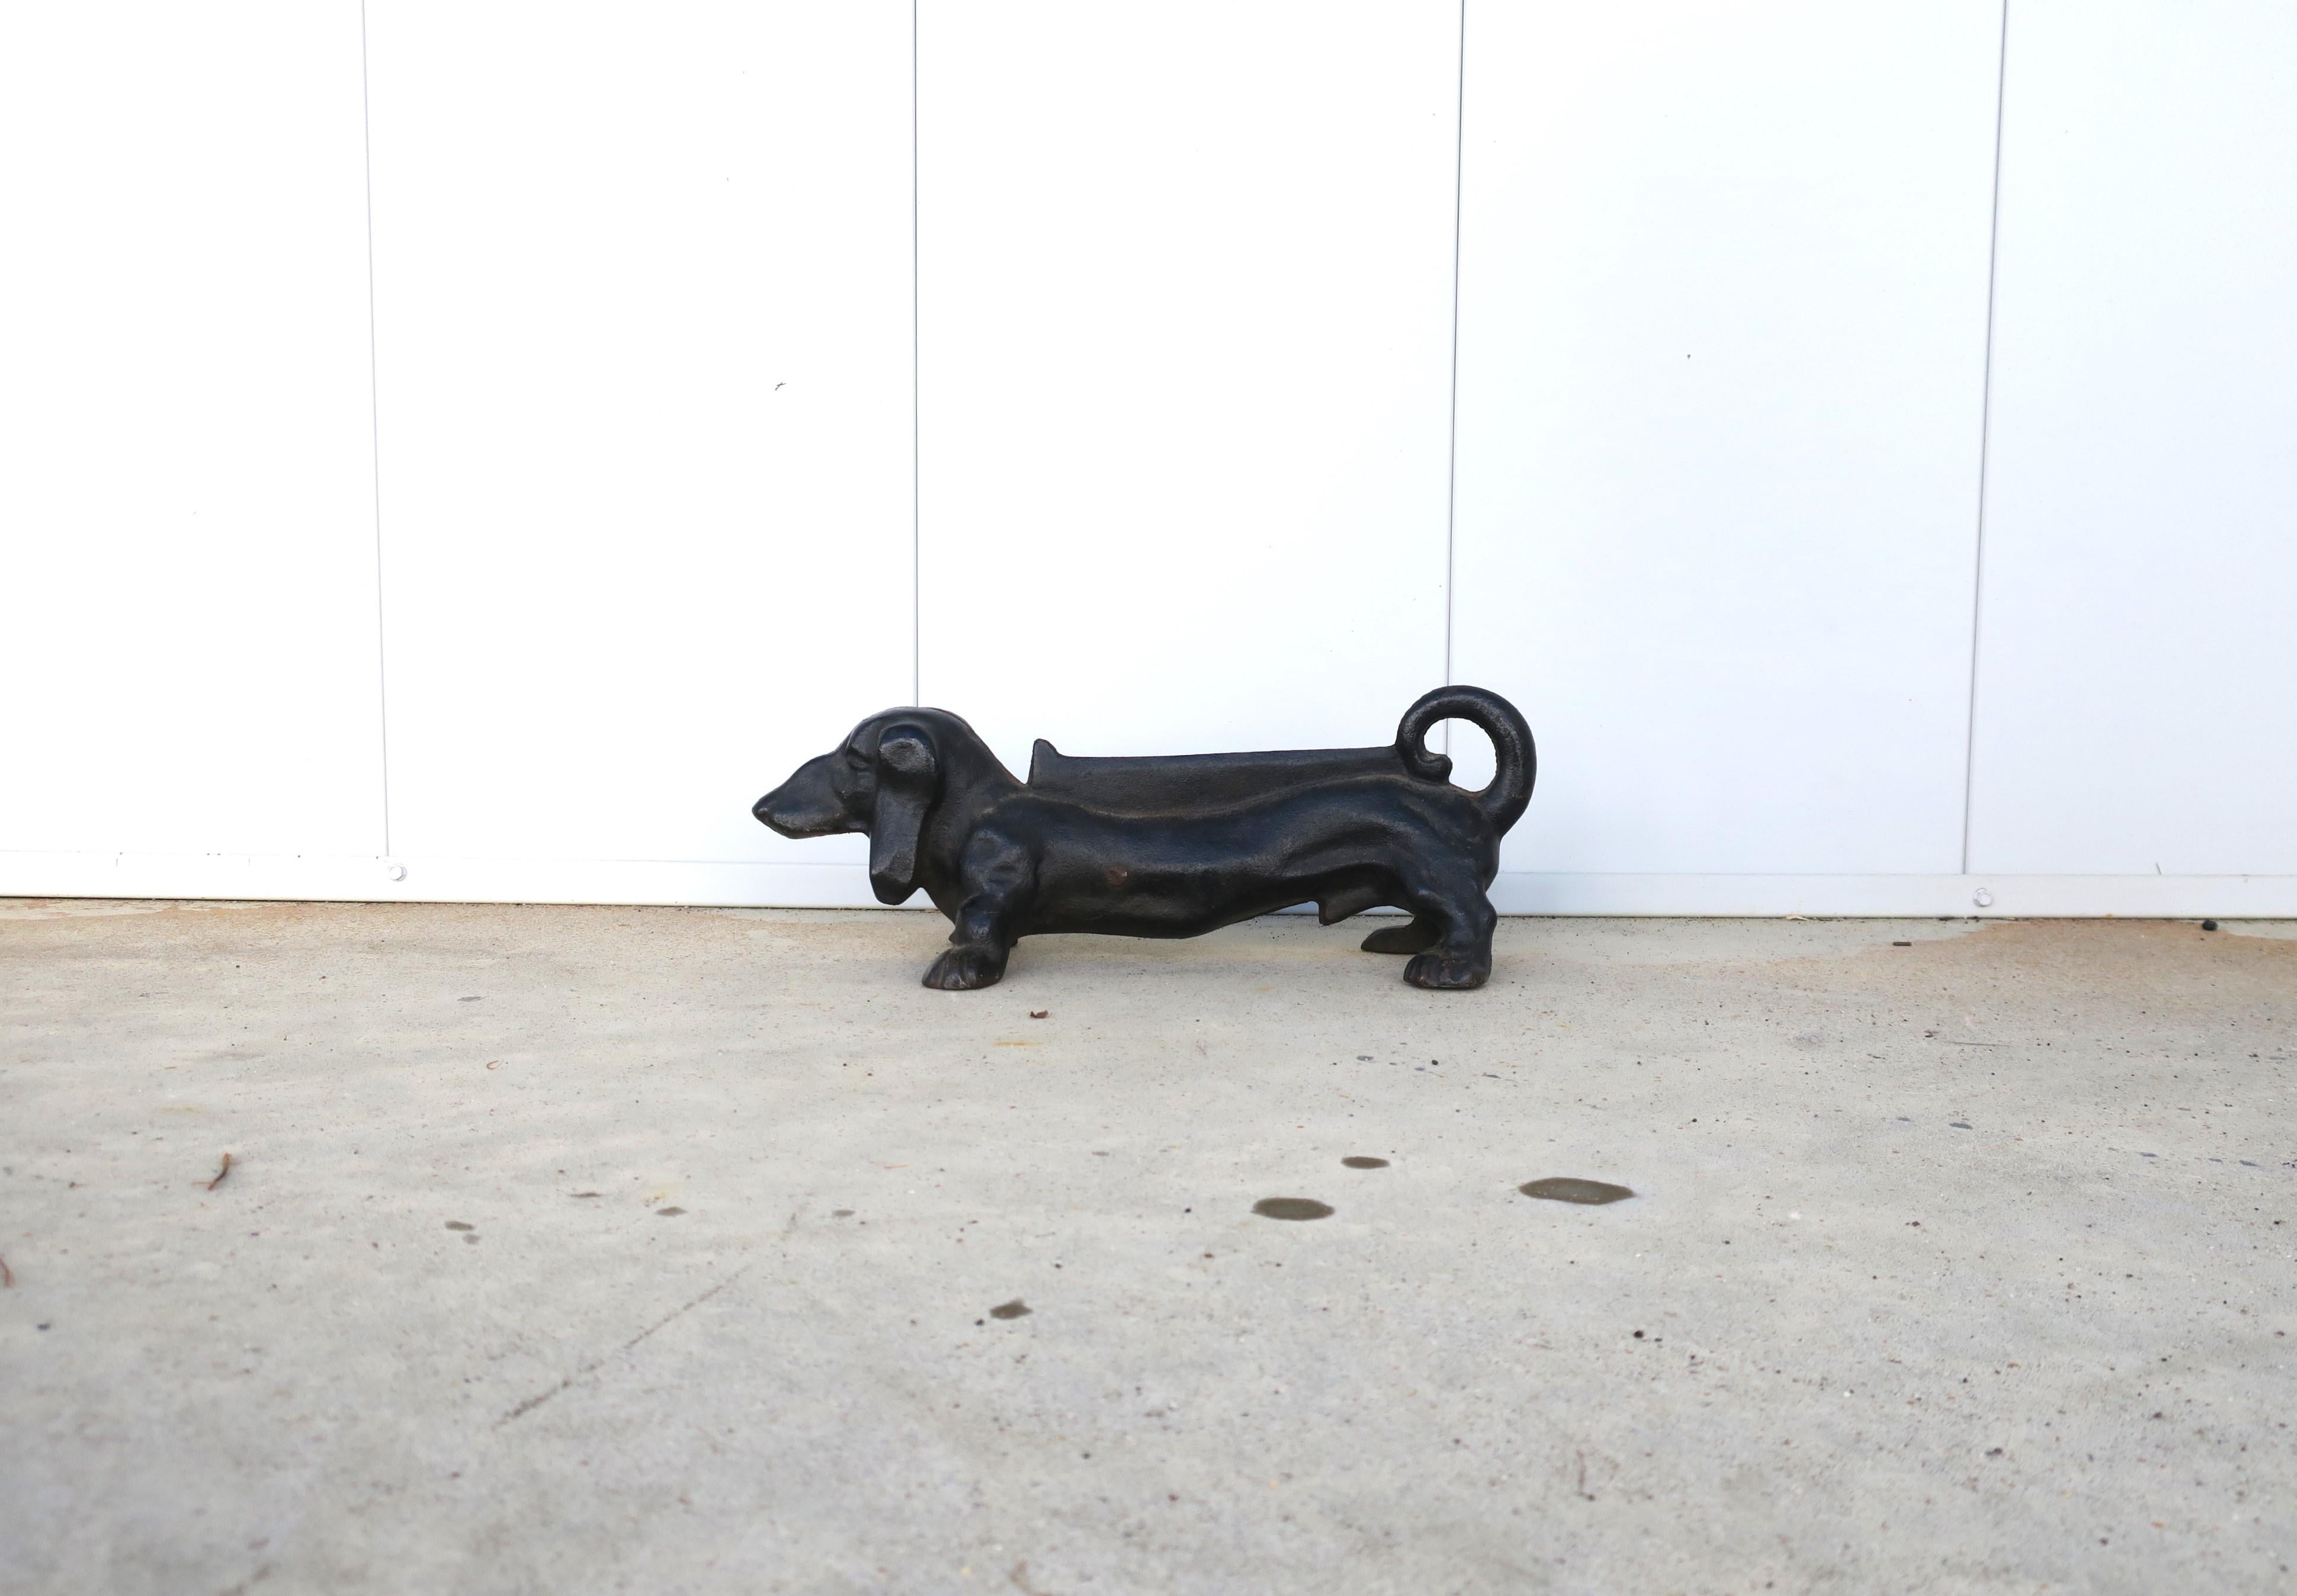 Look at this cutie pie..! A substantial blackened iron Dachshund dog doorstop and boot scraper, circa early 20th century. 

Dimensions: 5.88